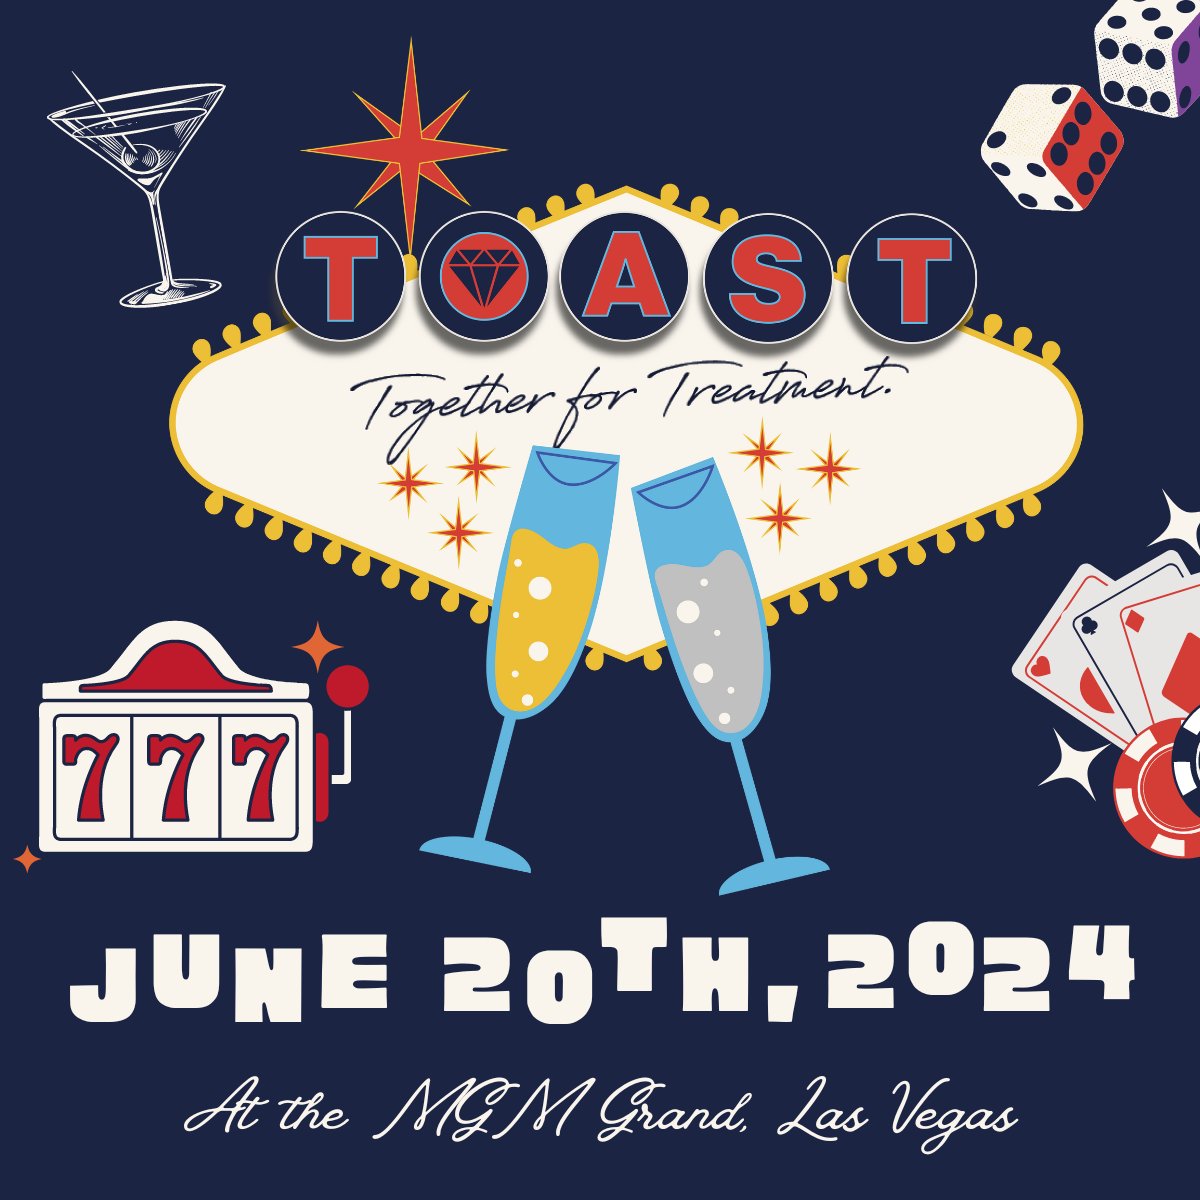 You can expect a premiere networking event at #TOAST this year. Thank you to our elite sponsors WeInfuse, Eitan Medical (Auction Sponsor), Pinnacle Revenue Management, Inc (Bar Sponsor), and Biogen (Entertainment Sponsor) for your support of TOAST. lnkd.in/dBRT-cz2